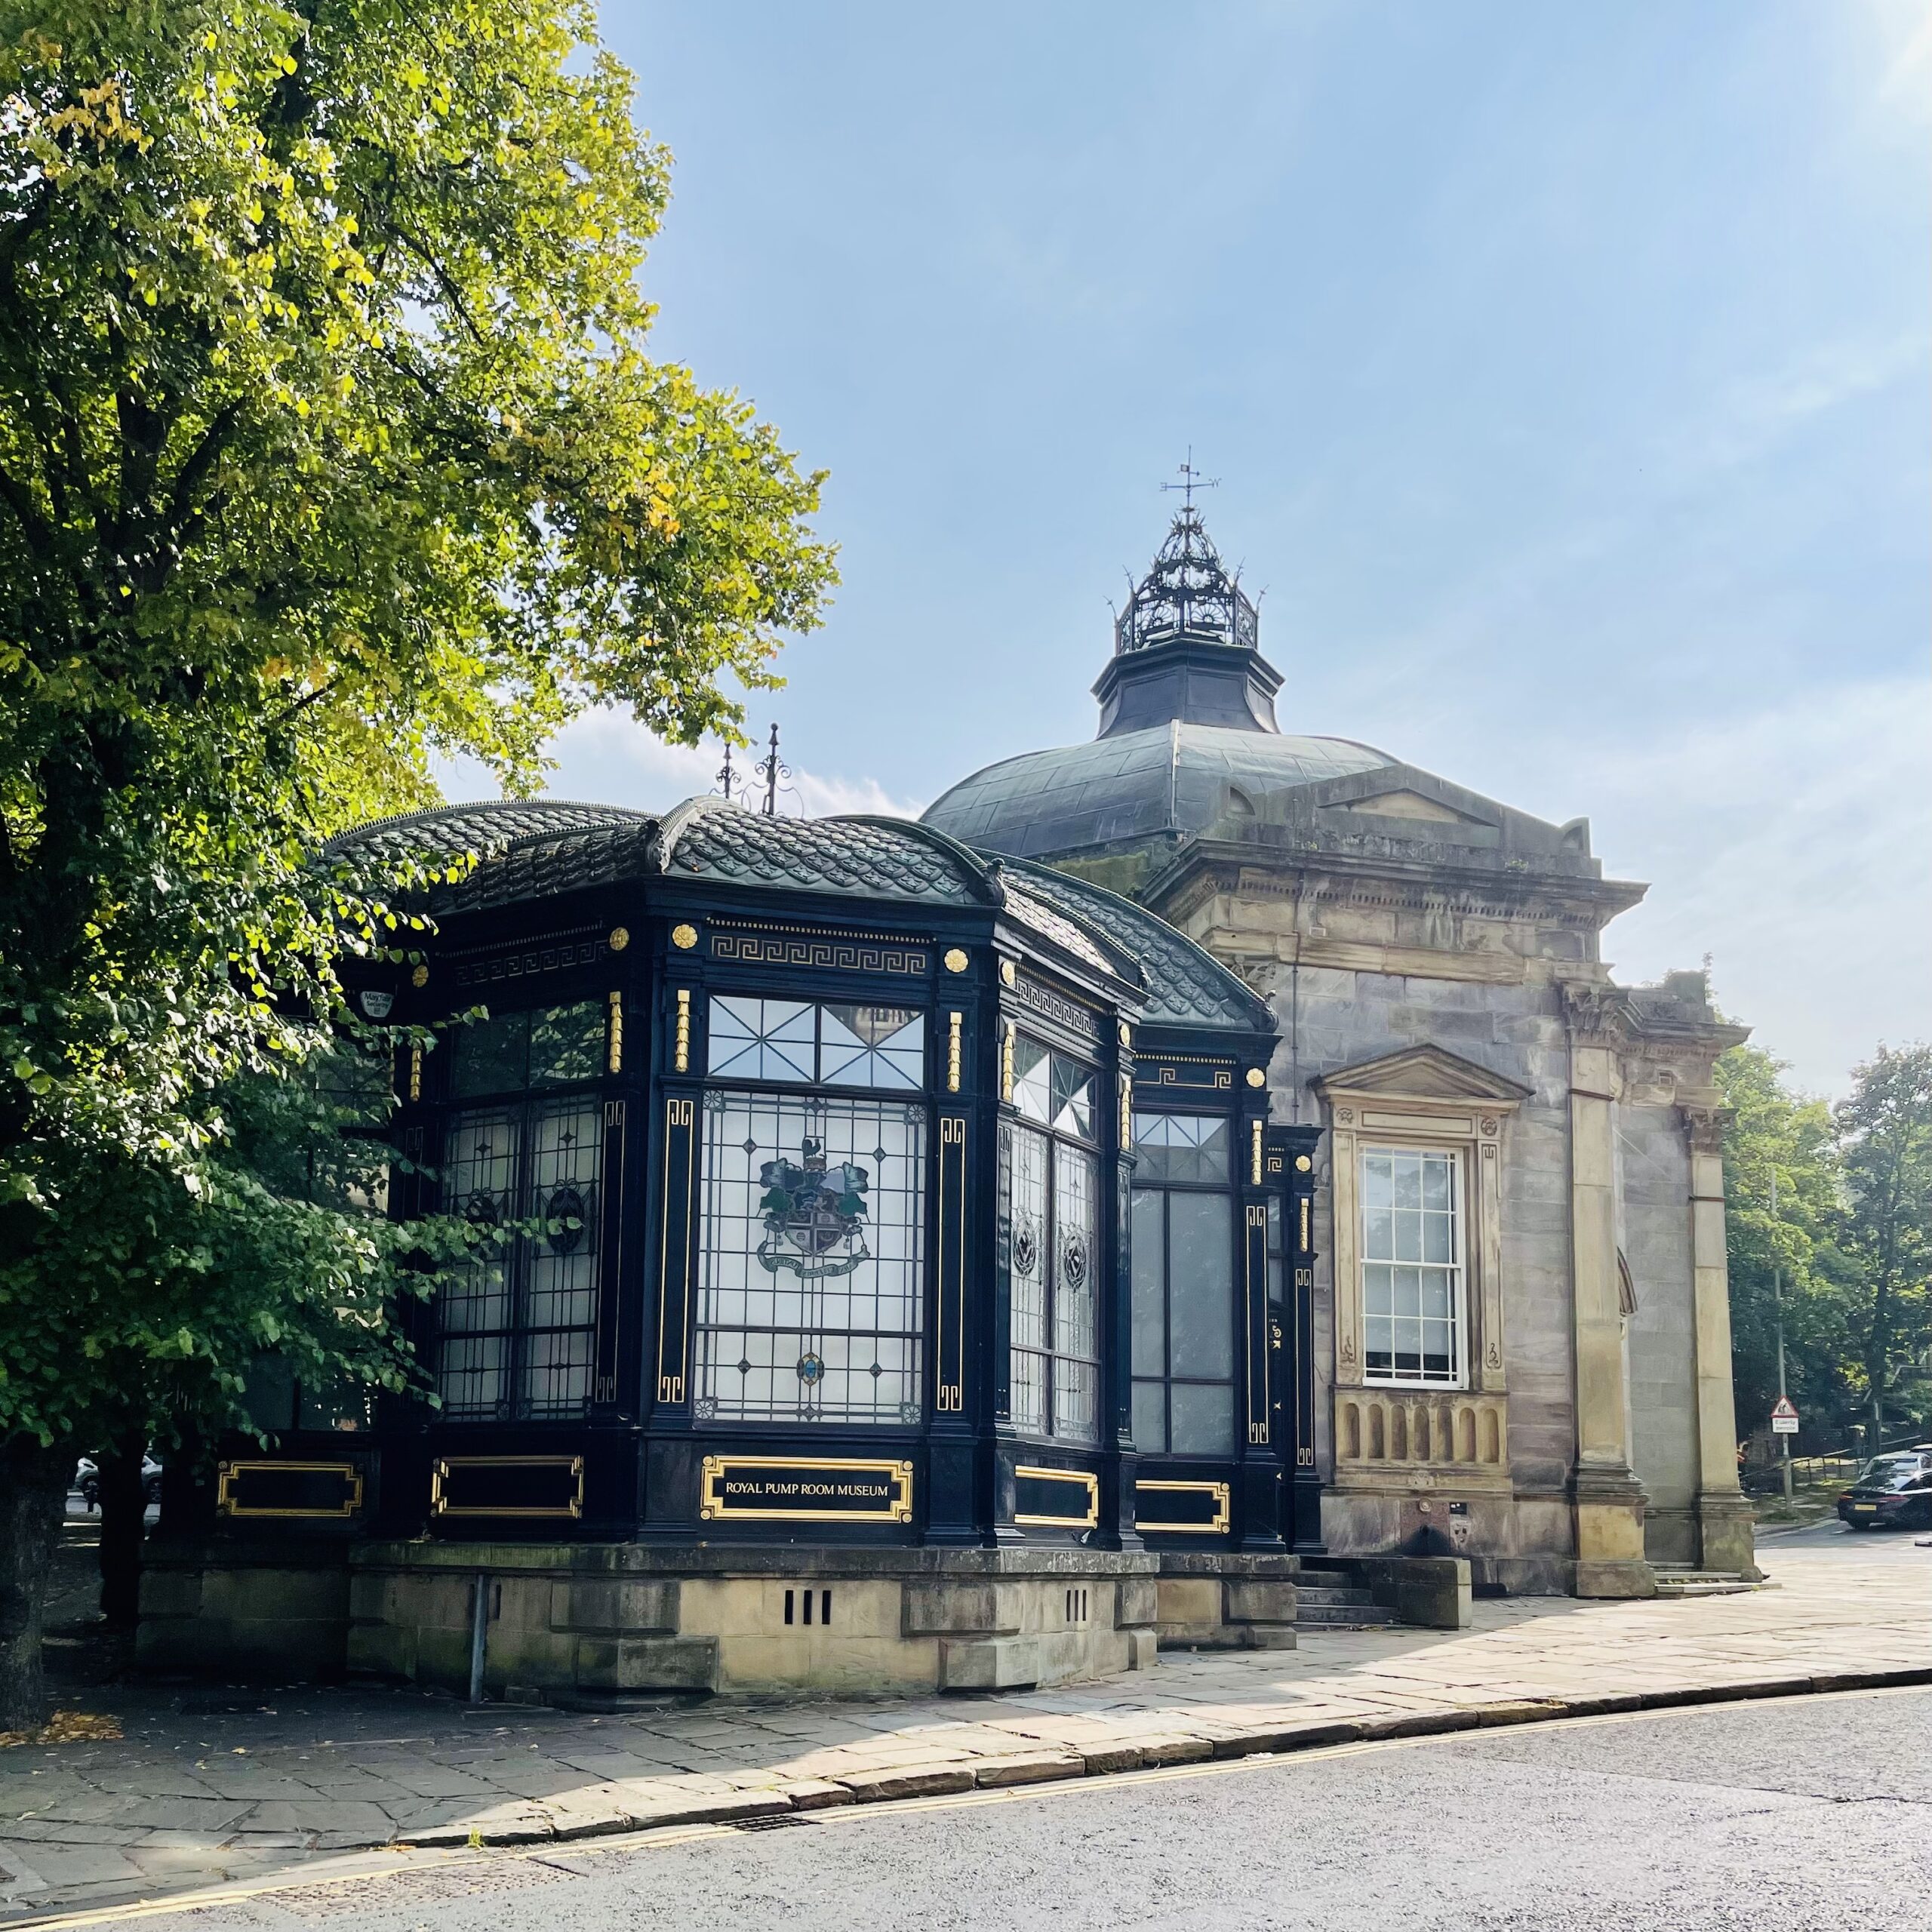 Discover New, Inexpensive & Low Cost Activities in Harrogate - The